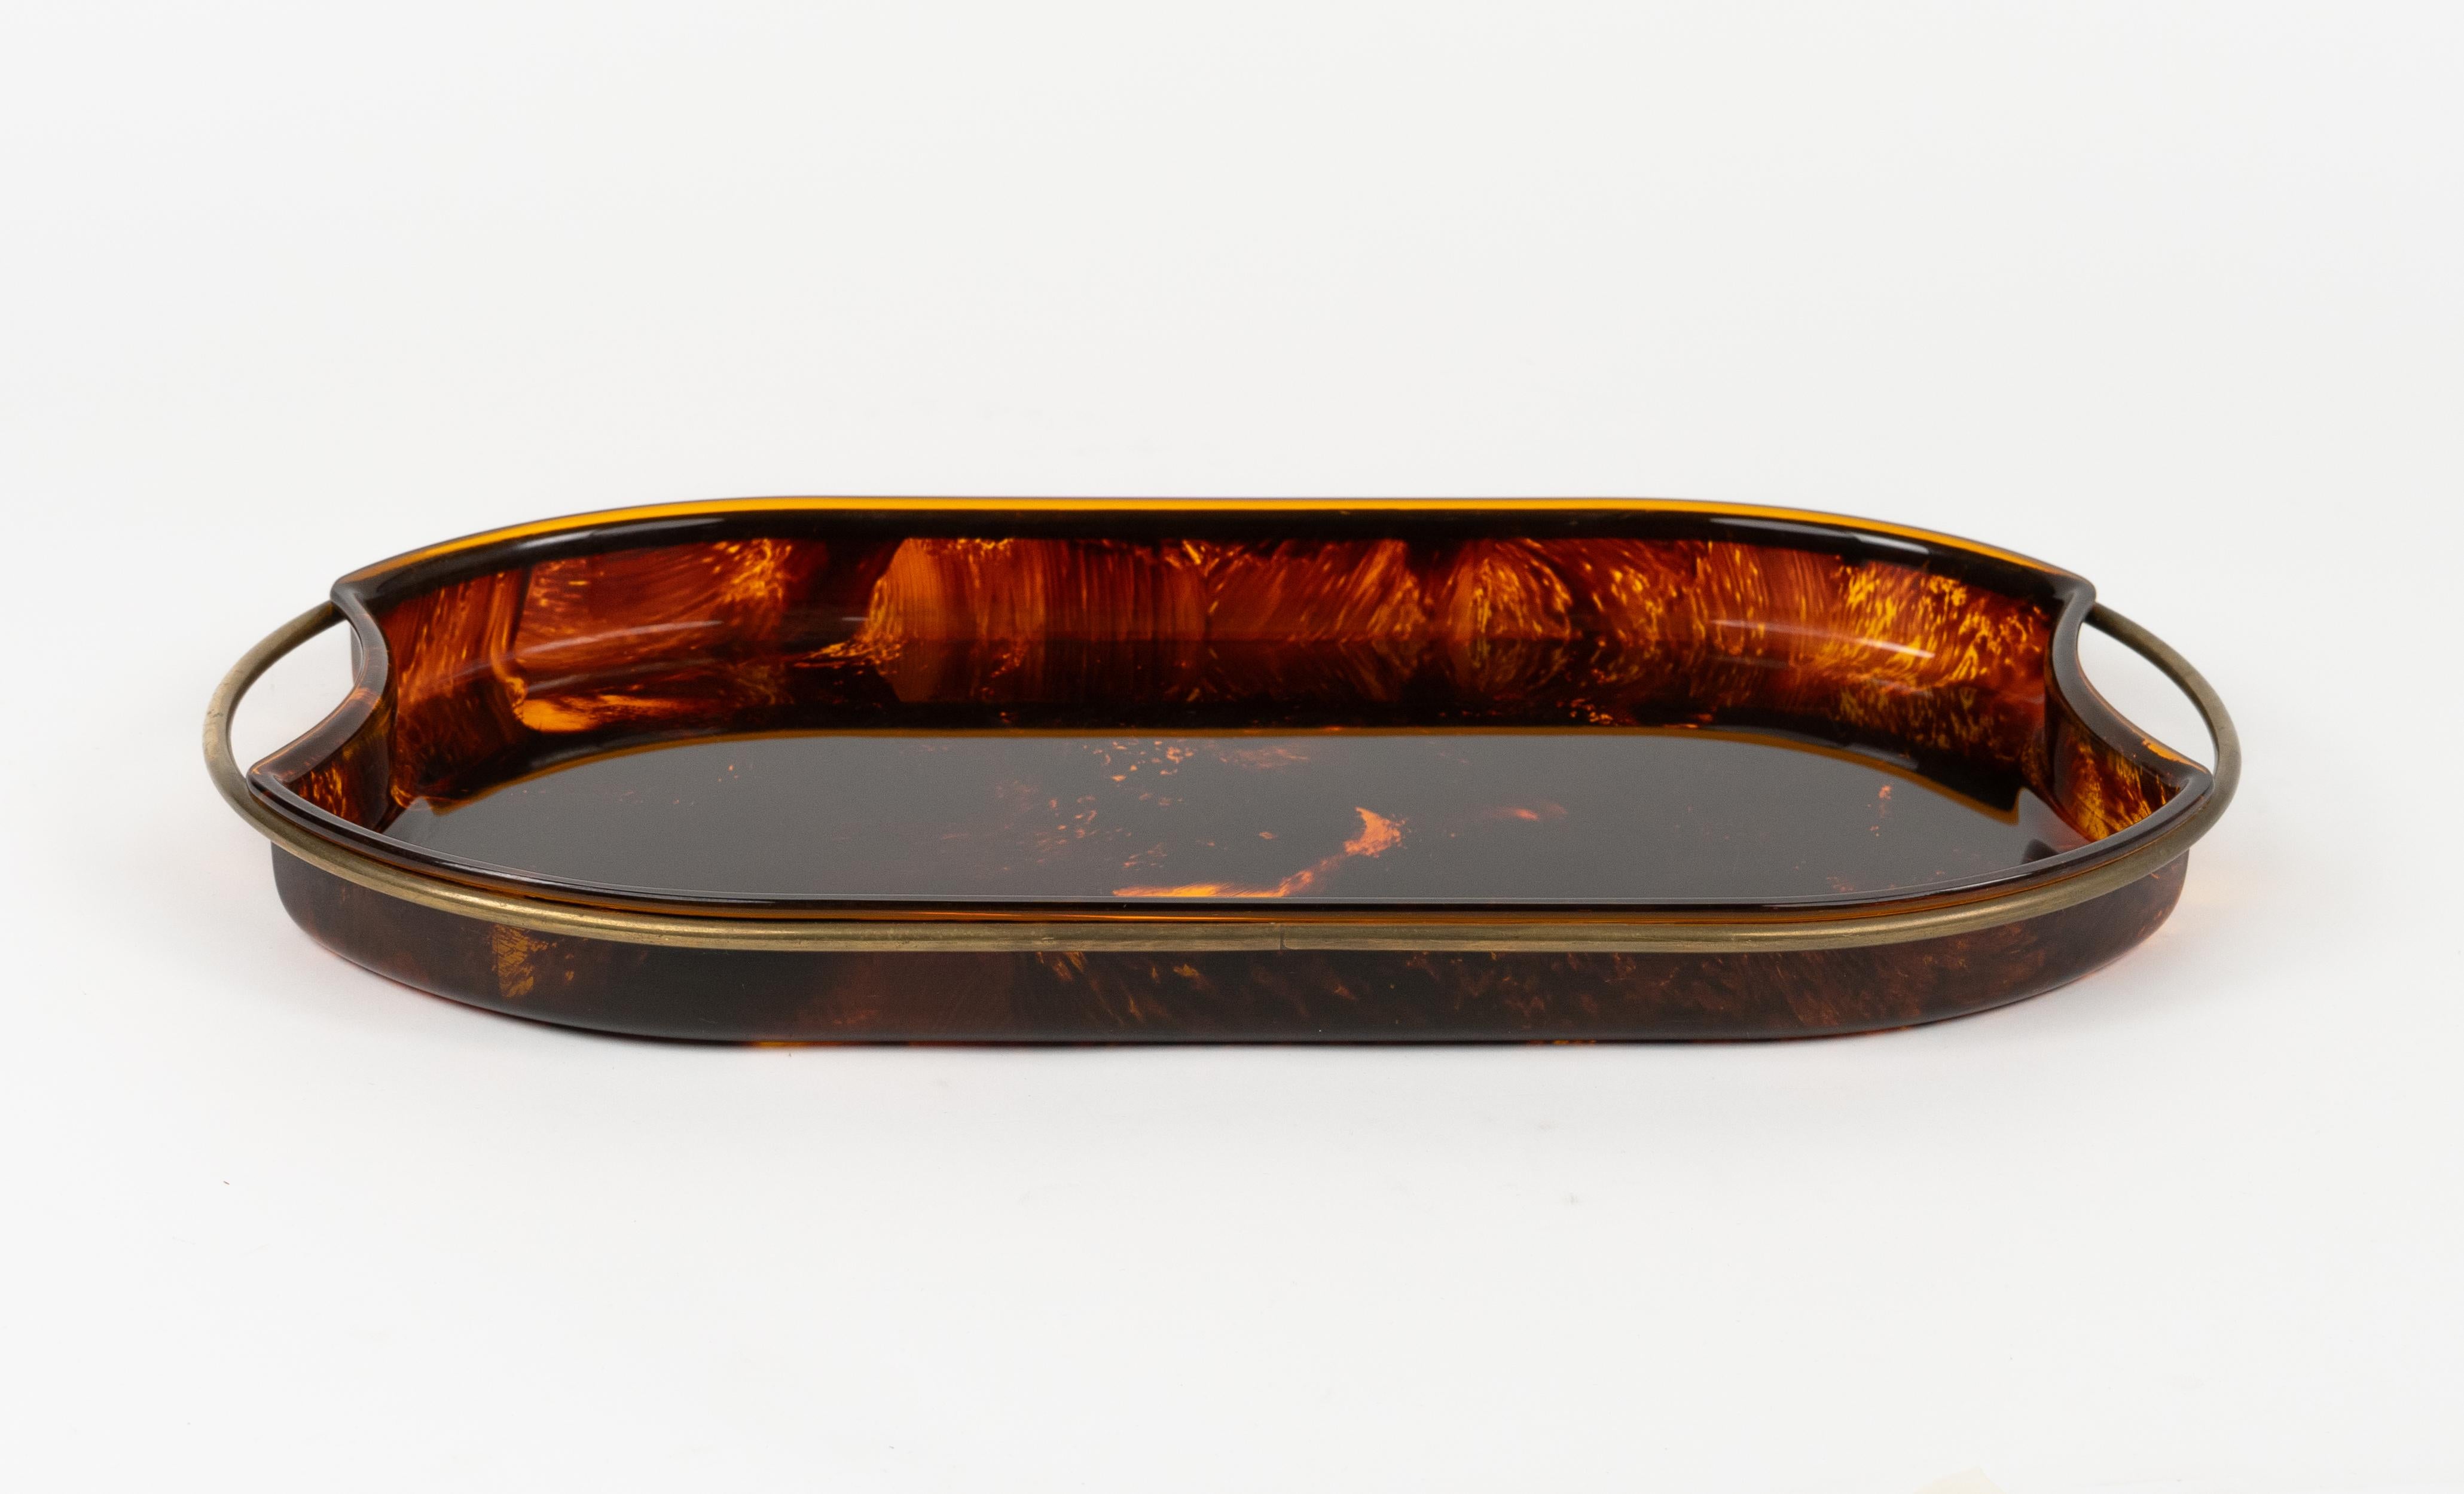 Mid-Century Modern Oval Serving Tray in Effect Tortoiseshell Lucite & Brass by Guzzini, Italy 1970s For Sale